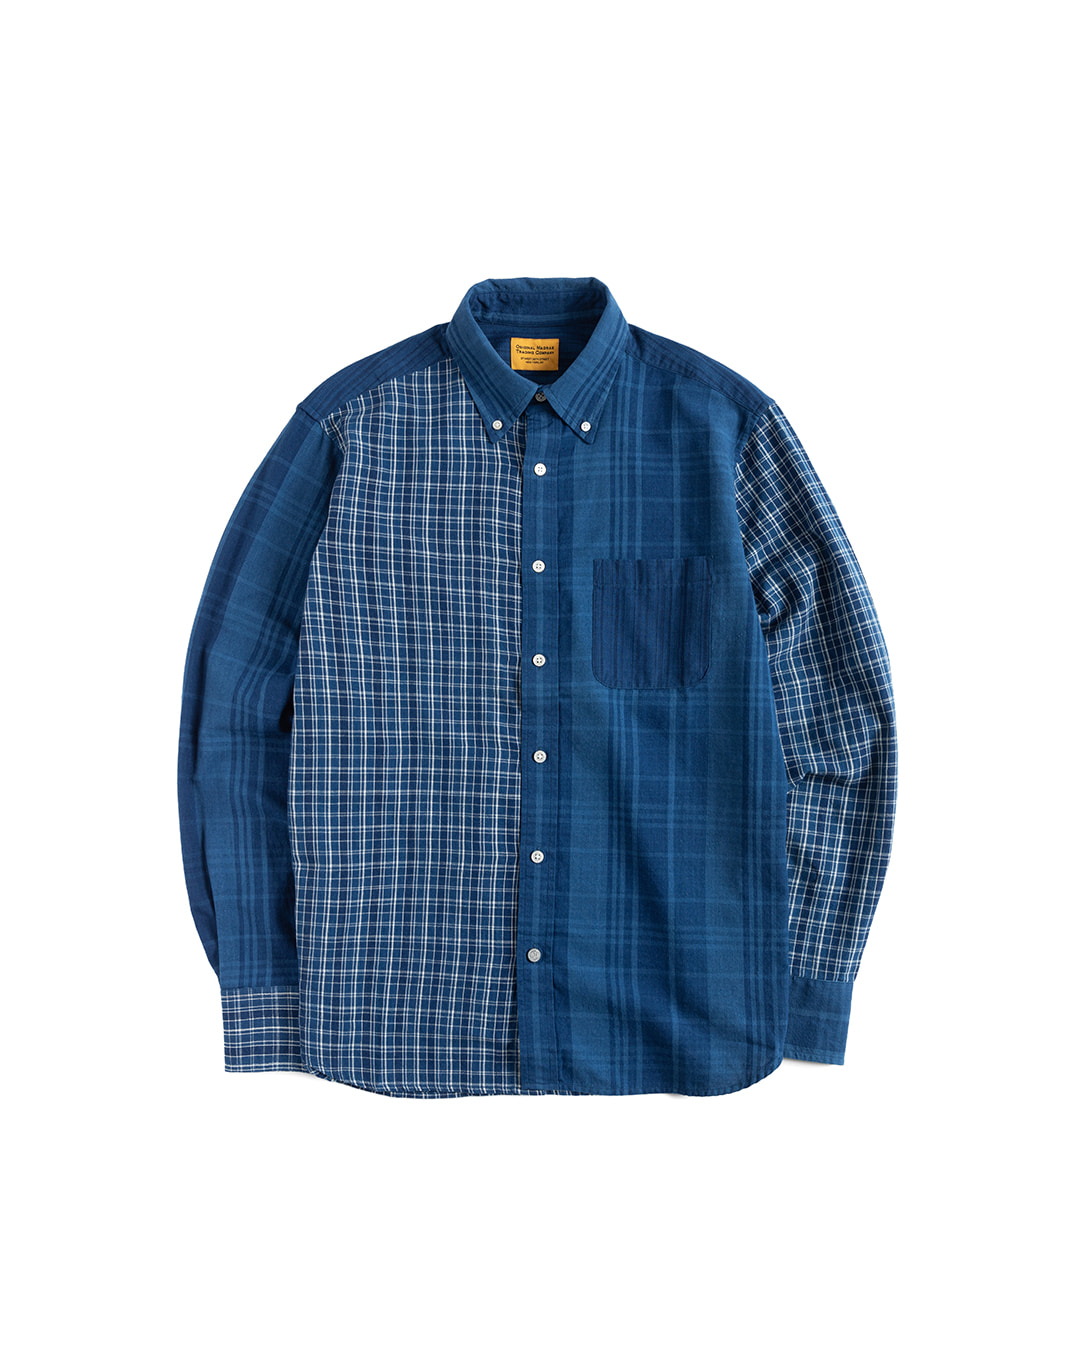 44611-X3 CONTRASTING PARTS BUTTON DOWN SHIRT (multi)